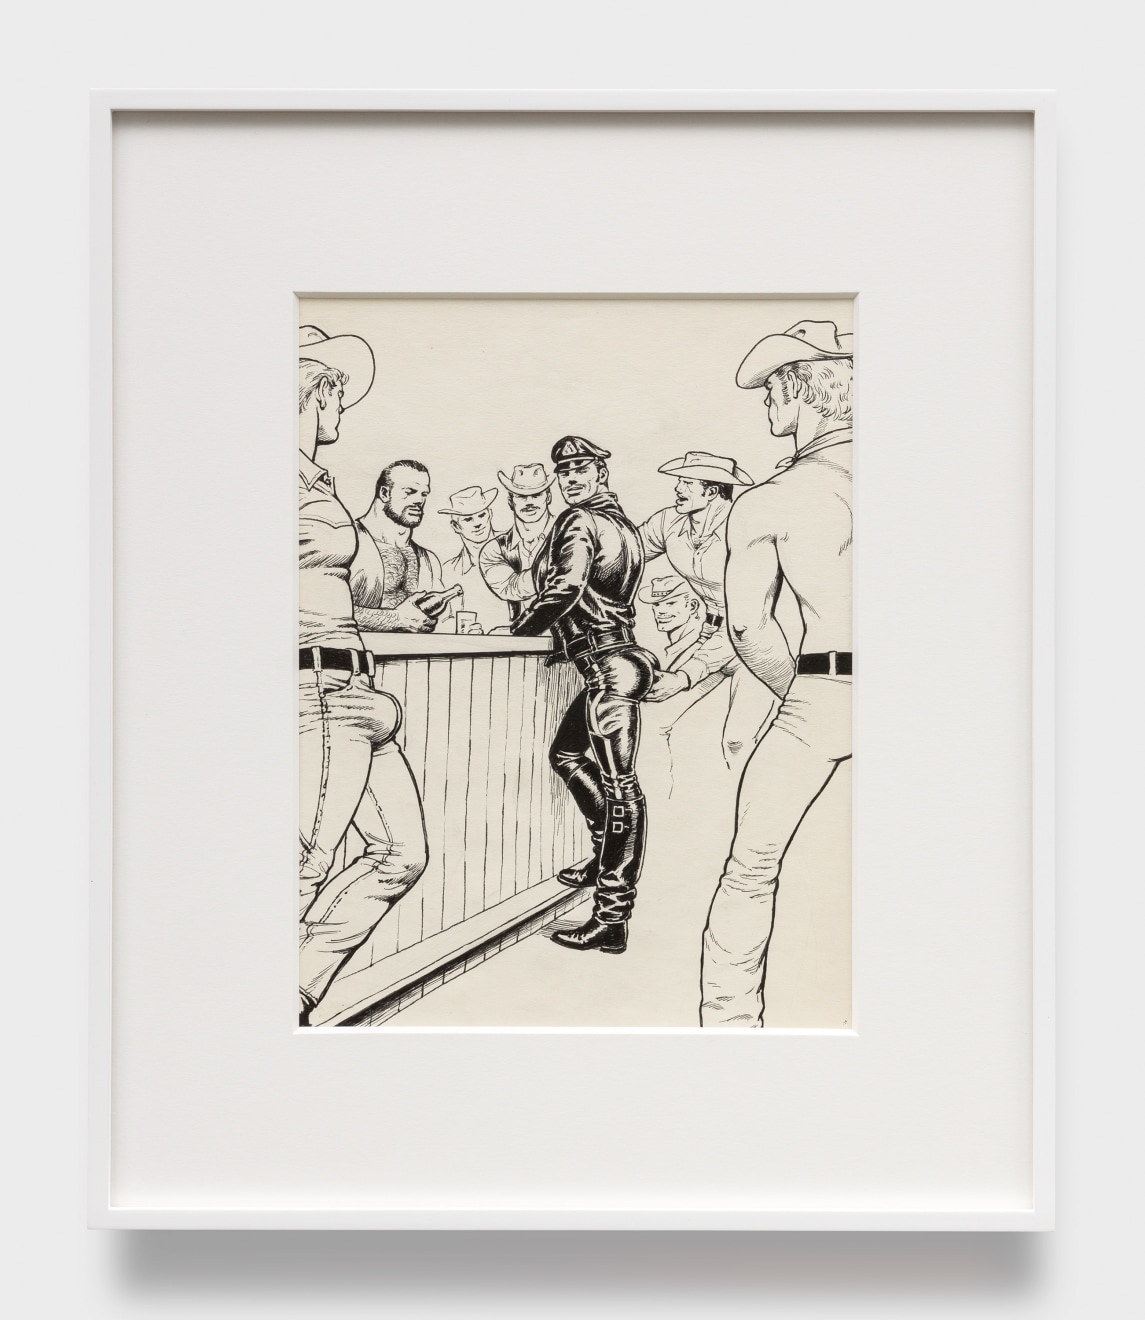 Tom of Finland, Untitled (from Kake vol. 23 - &quot;In the Wild West&quot;), 1982